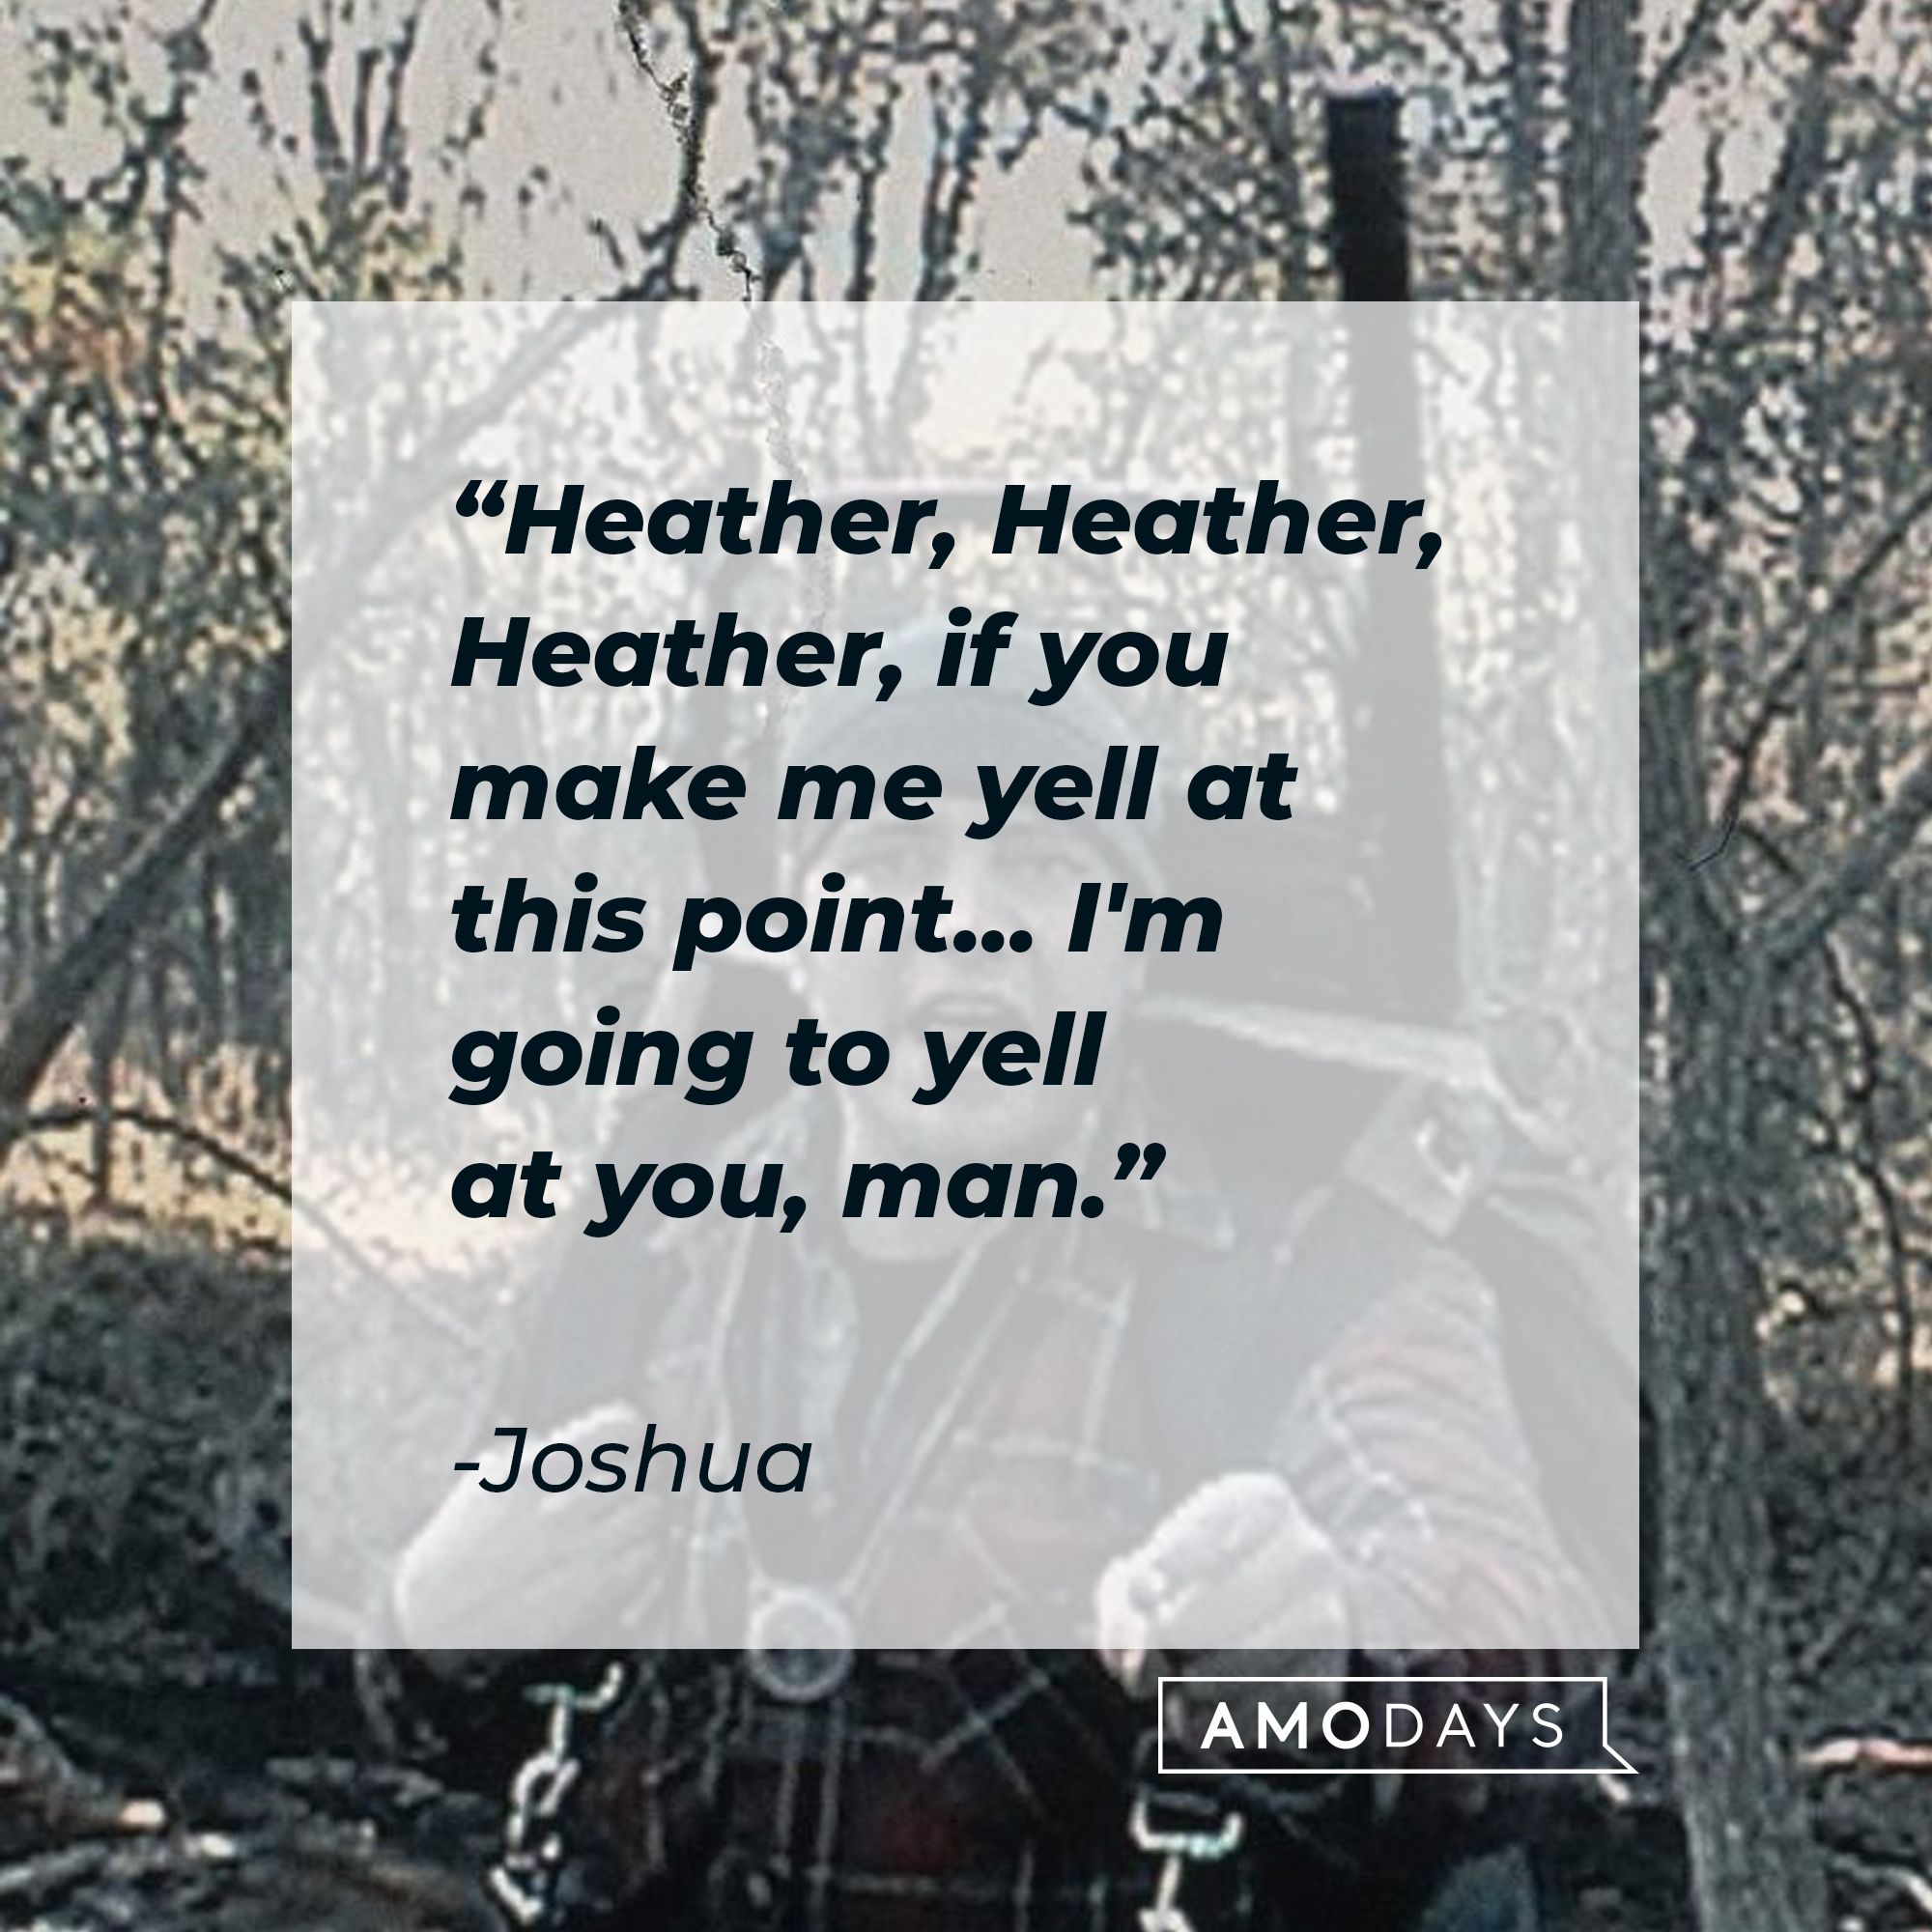 Joshua's quote: “Heather, Heather, Heather, if you make me yell at this point... I'm going to yell at you, man.” | Source: facebook.com/blairwitchmovie